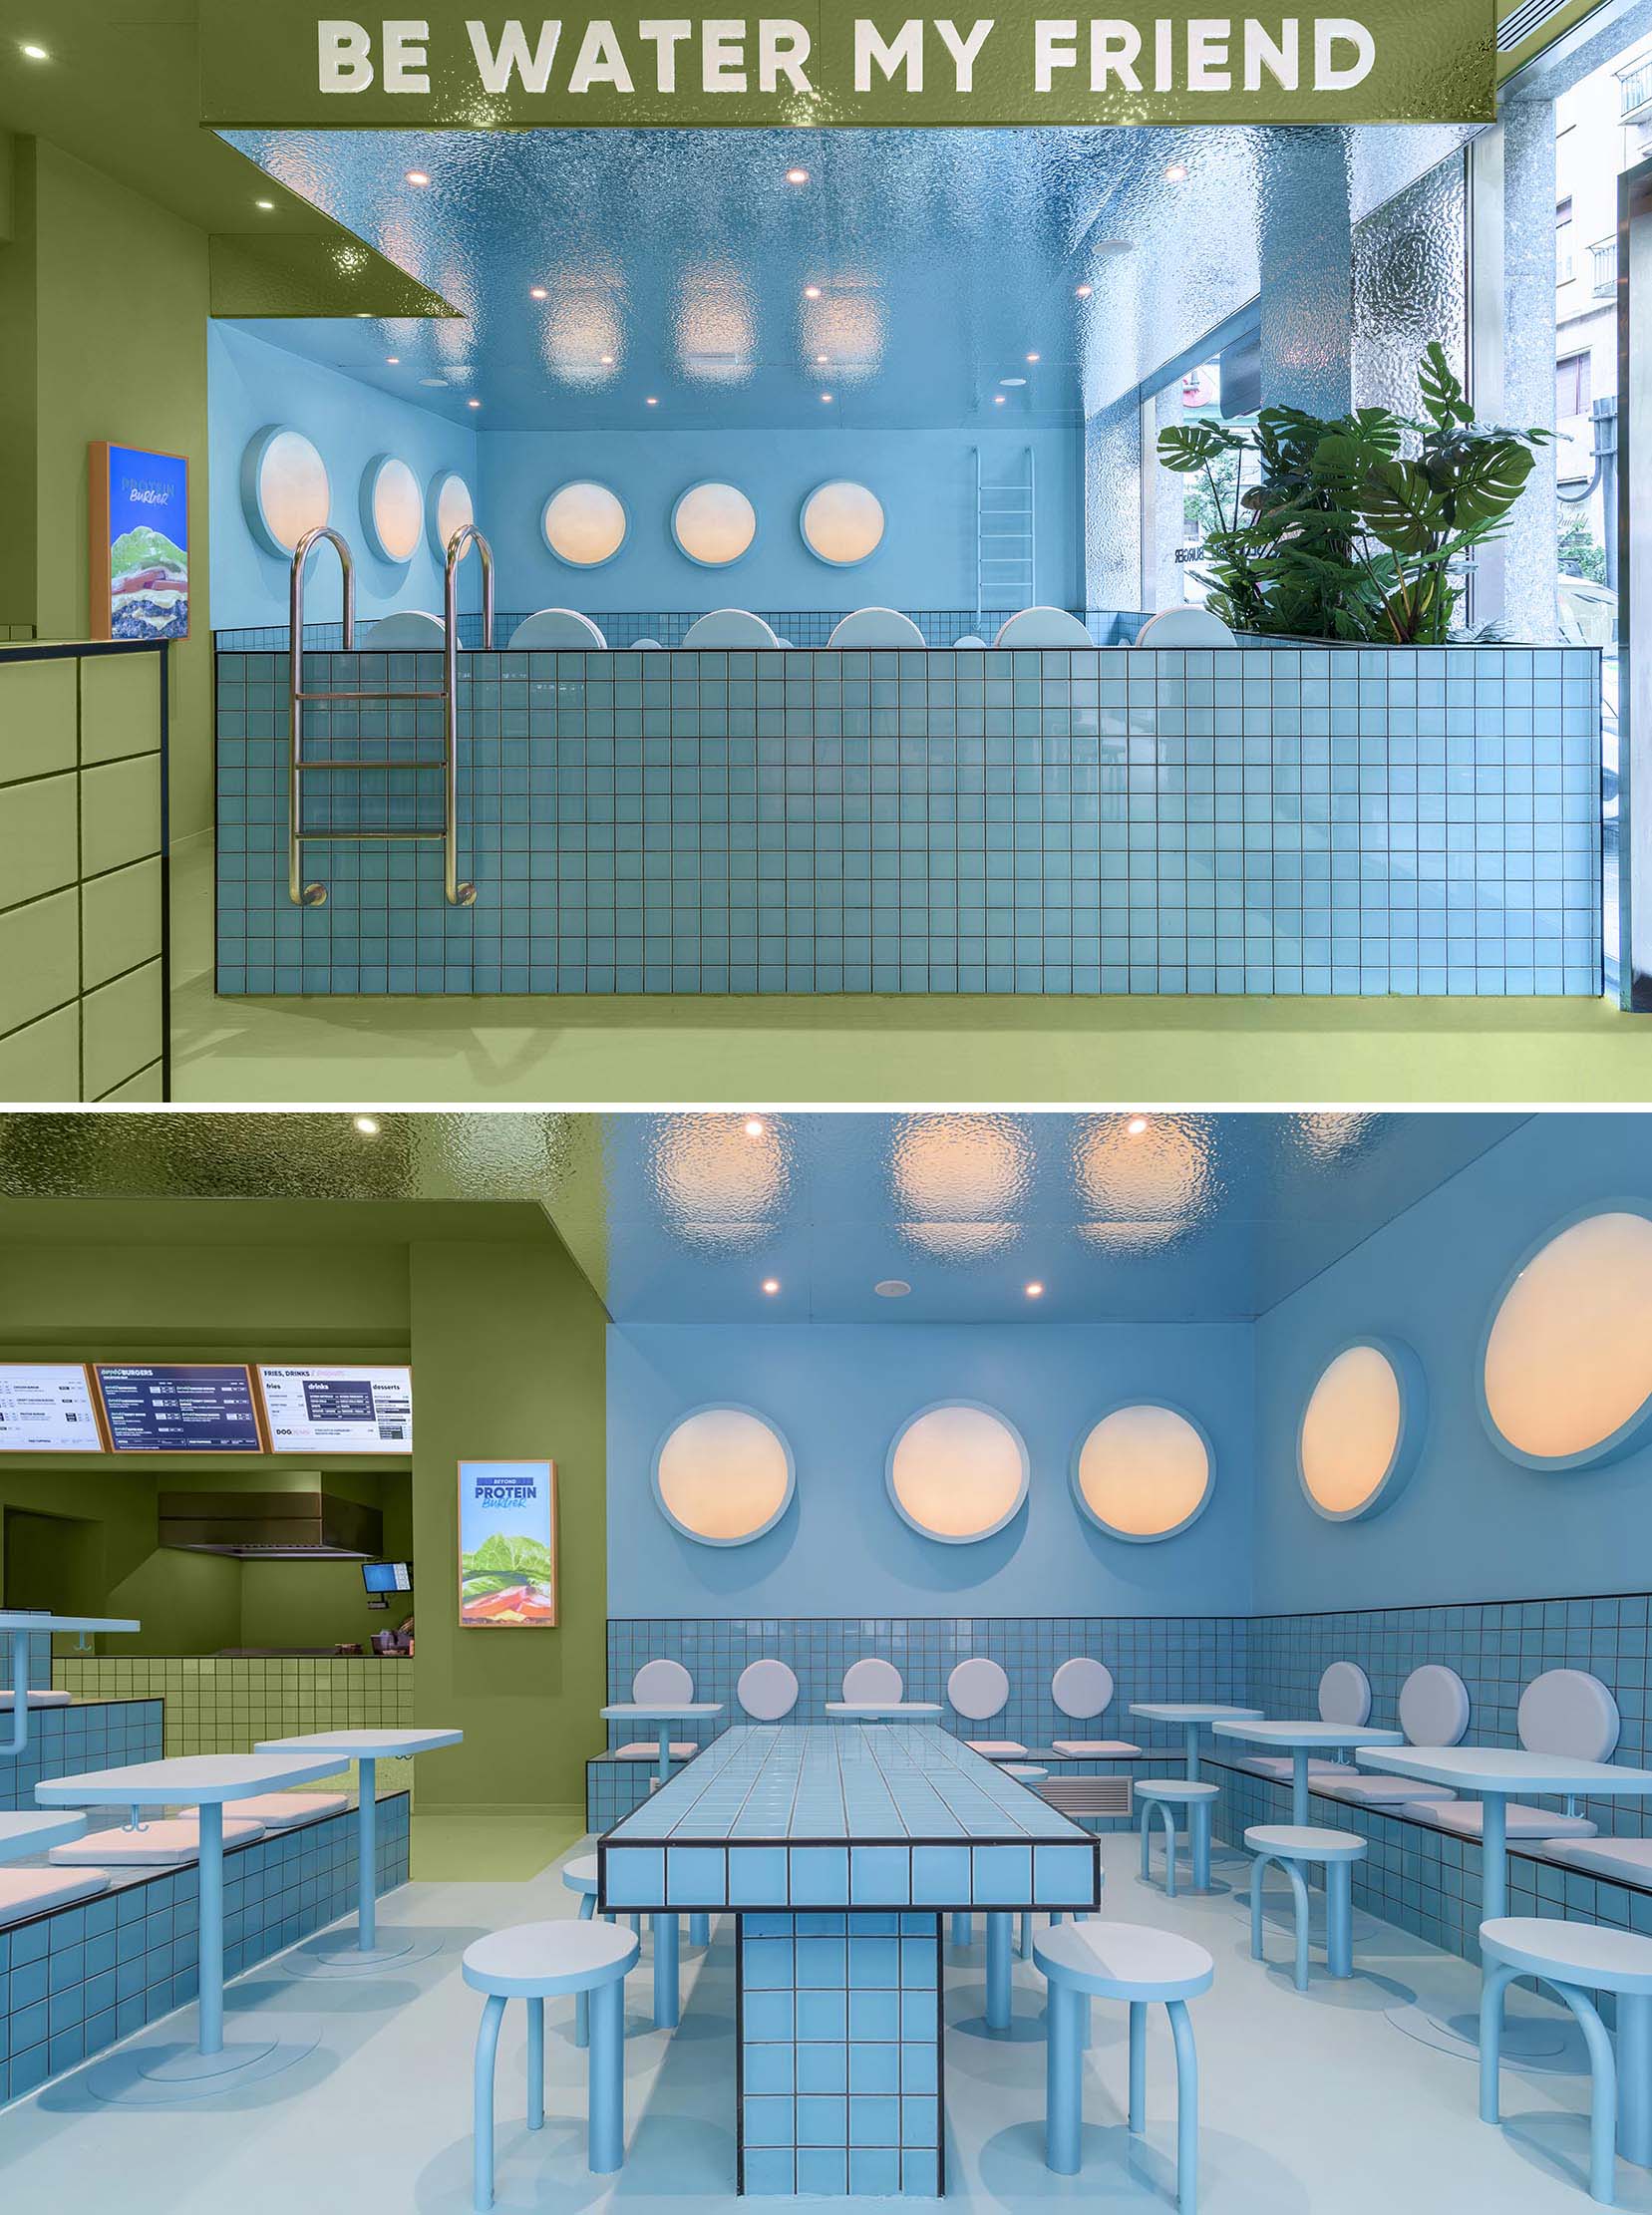 A modern restaurant interior with blue section inspired by a swimming pool.